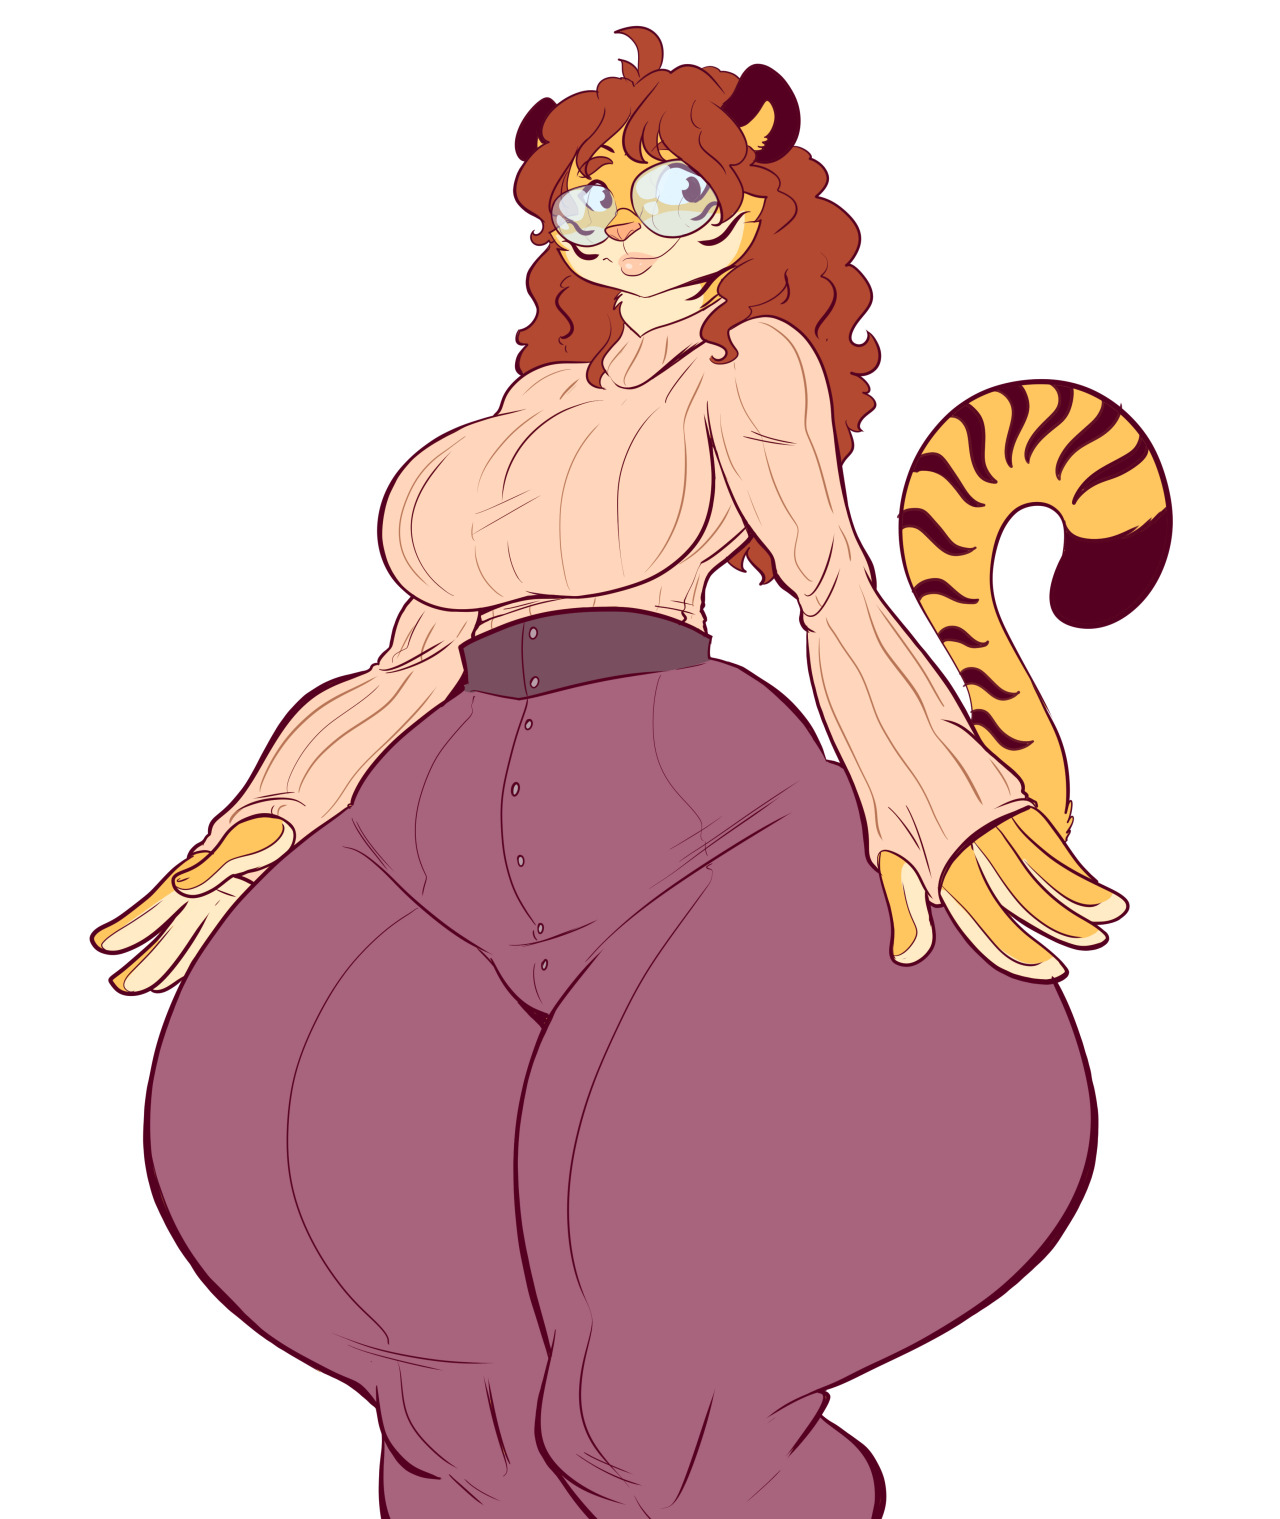 jaehthebird: Tanya’s mom pants :3 doodle! Trying soemthing differentwith BB’s